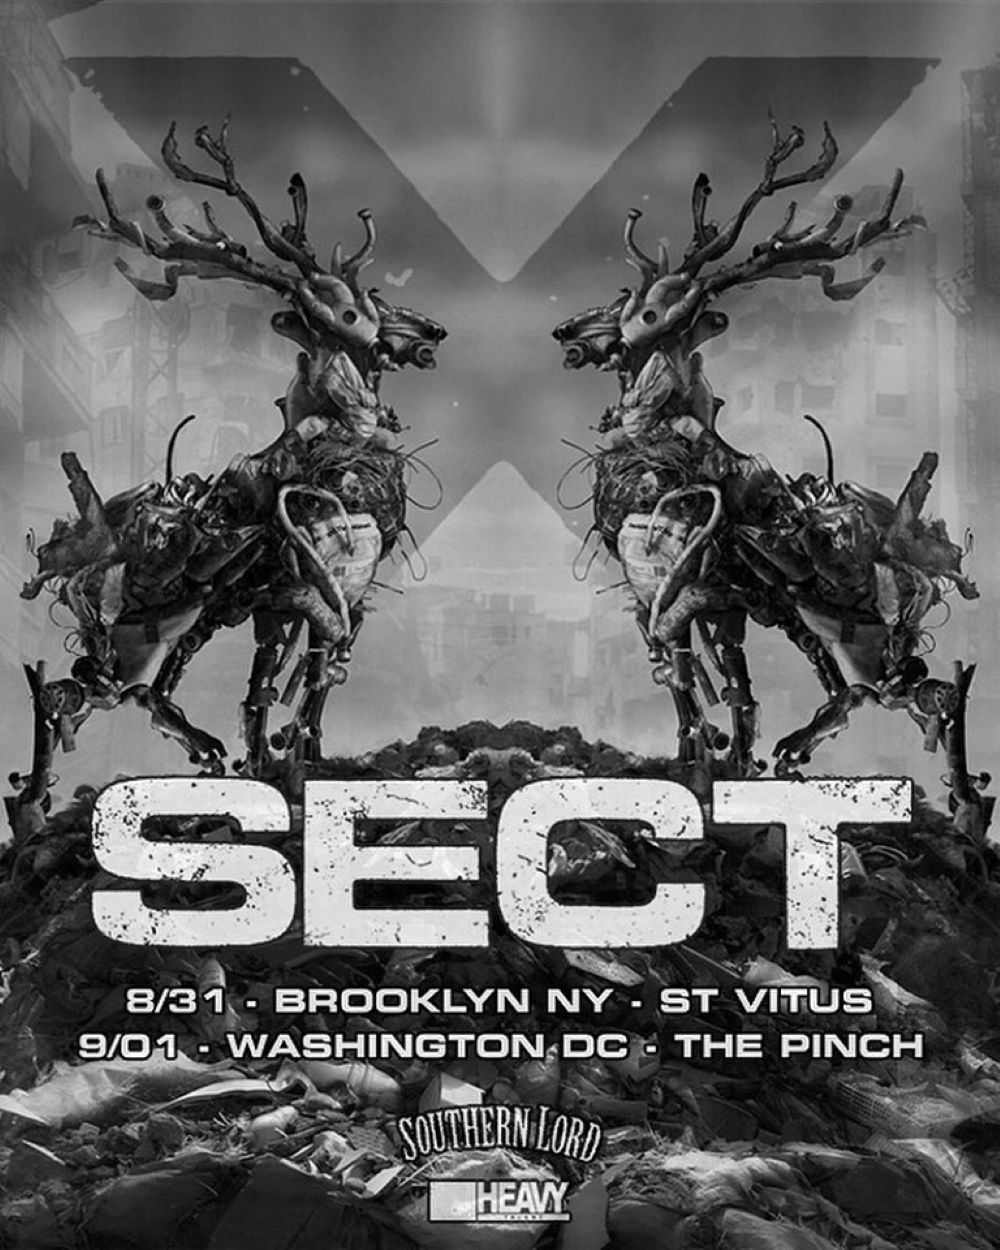 SECT live dates 2019